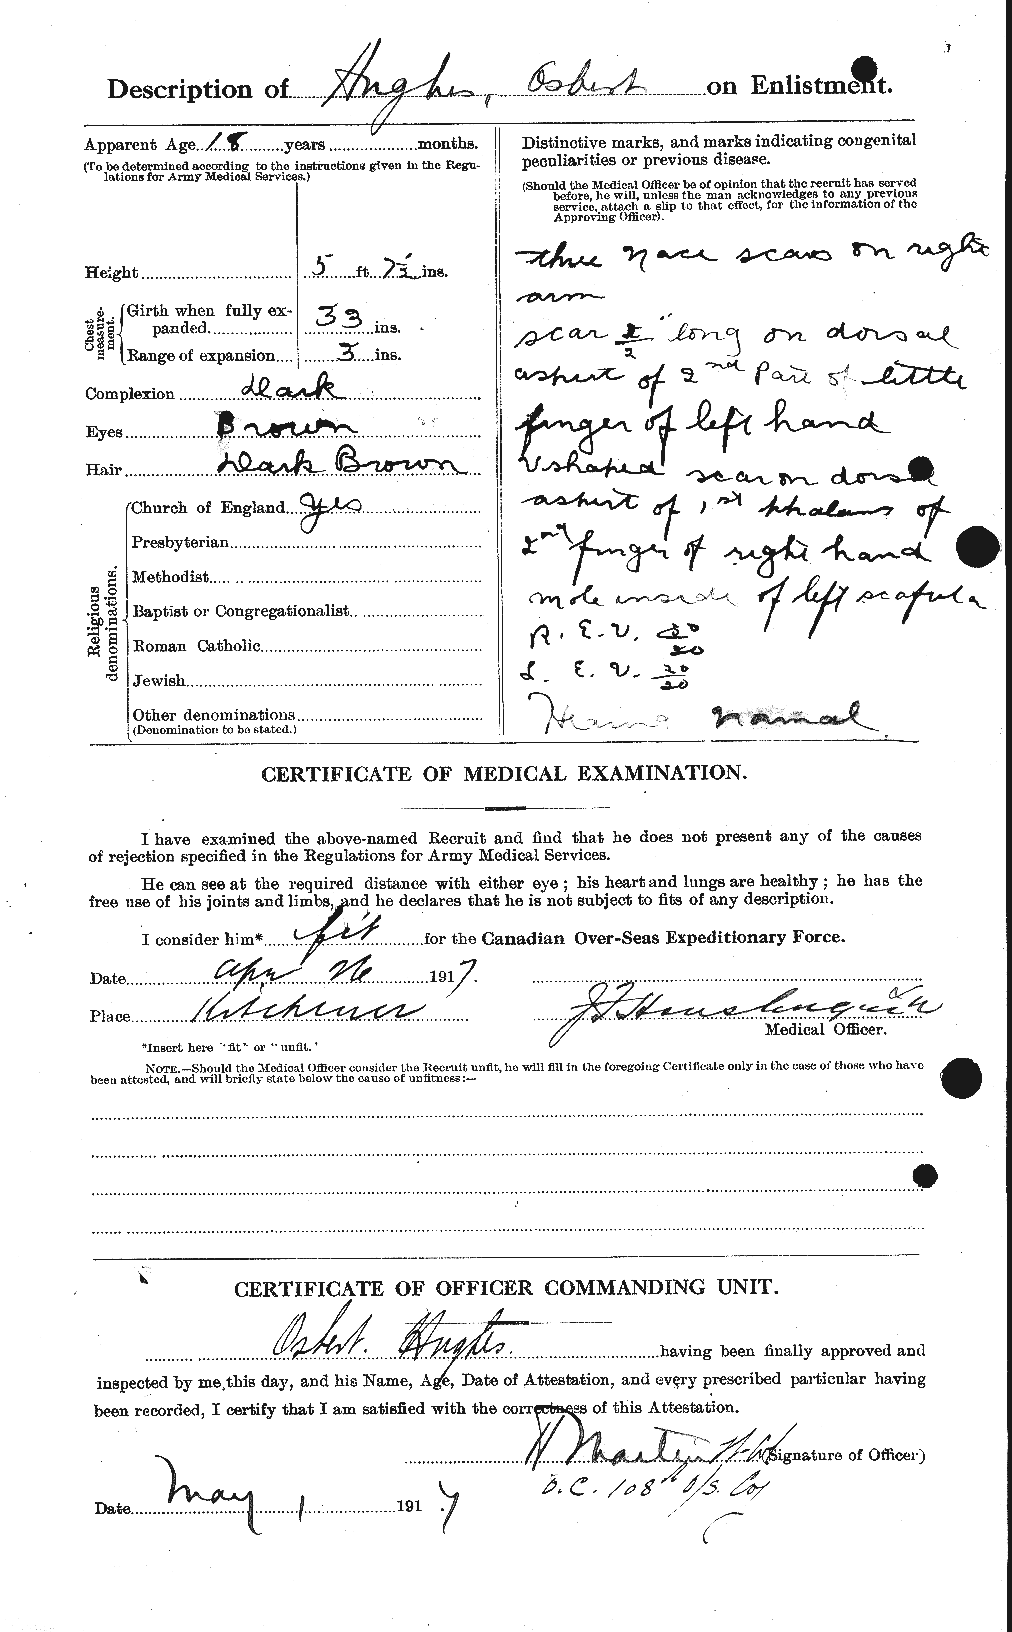 Personnel Records of the First World War - CEF 404136b